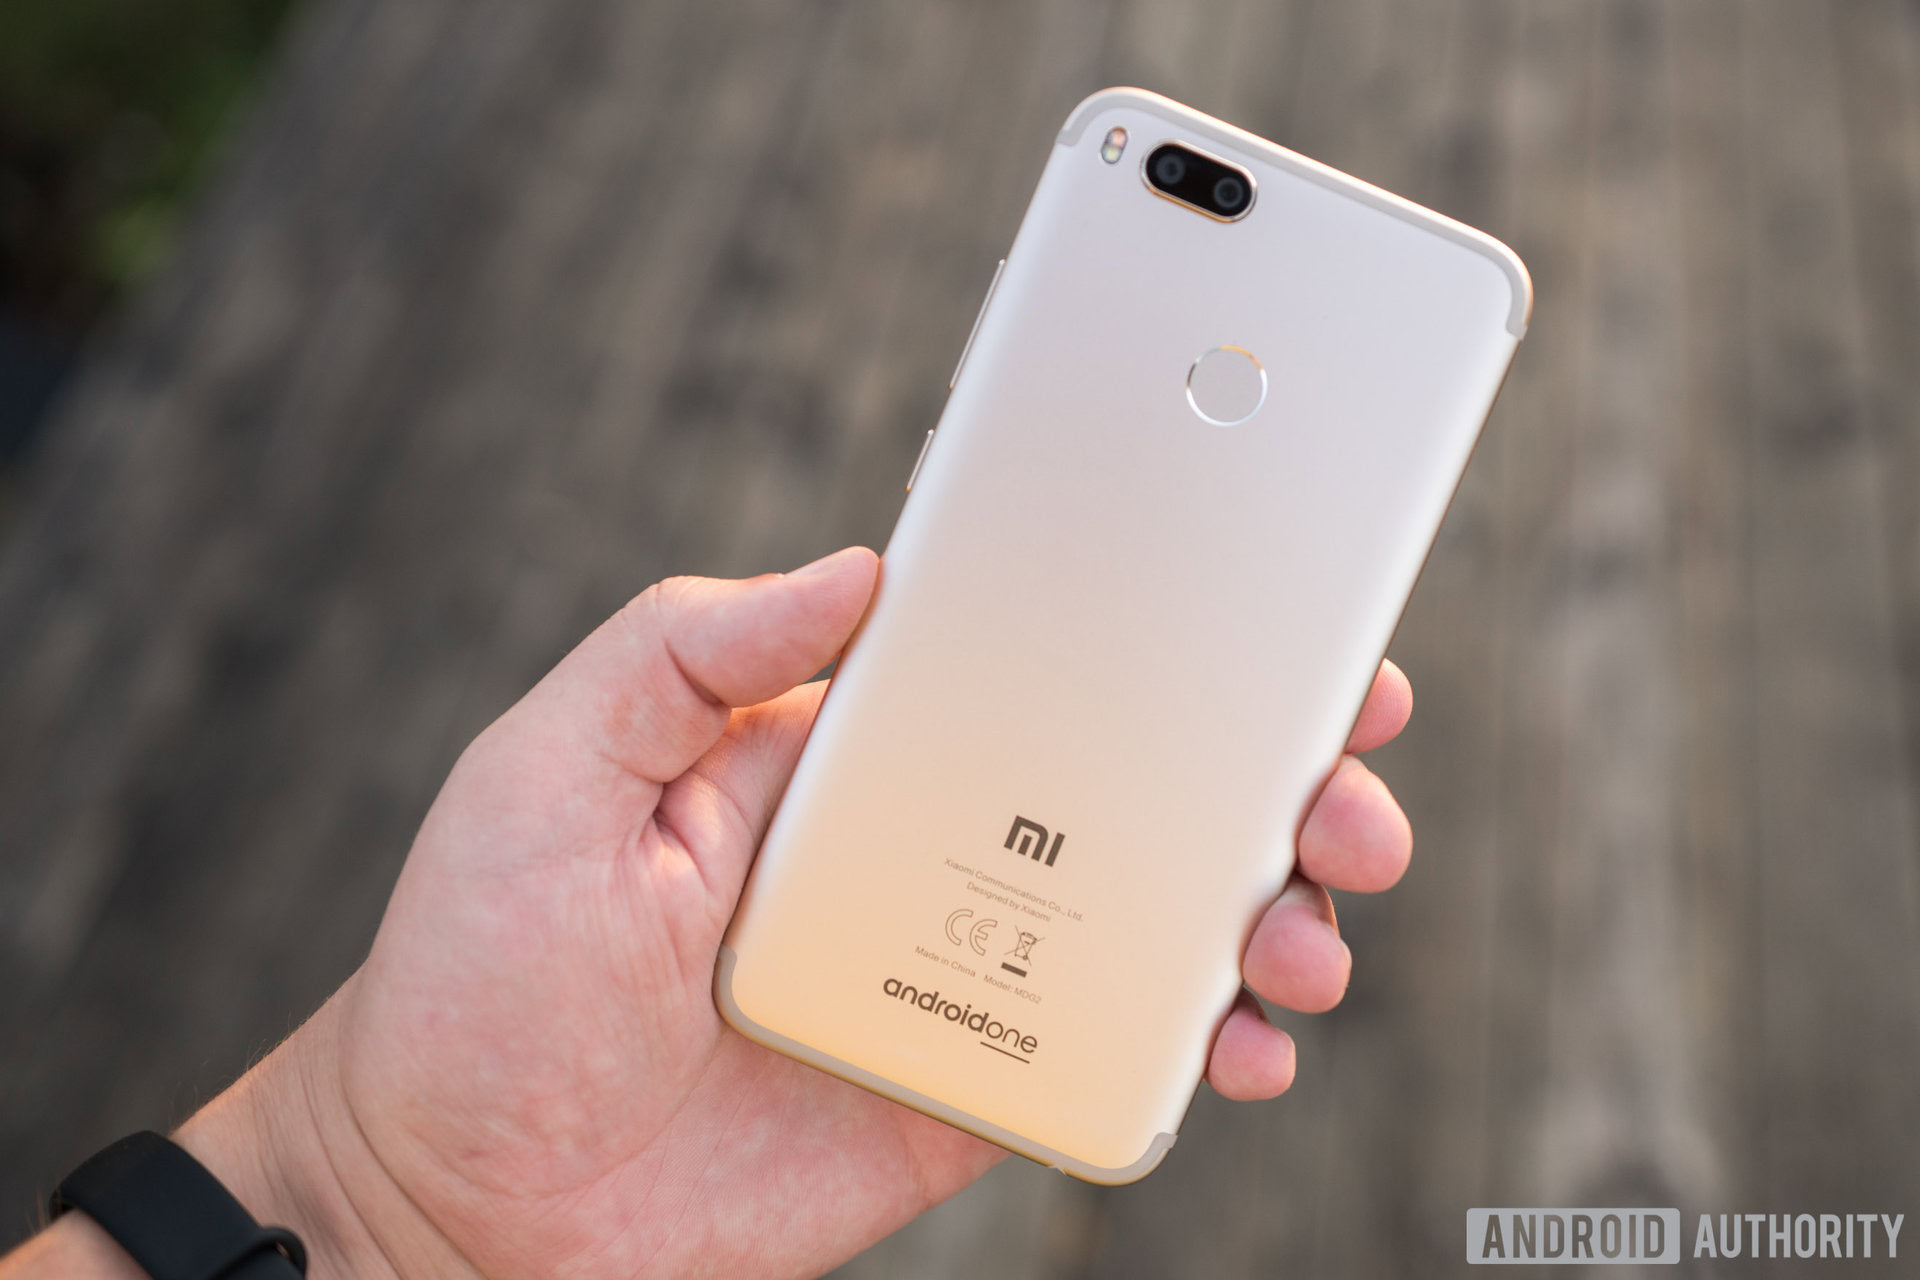 Xiaomi Mi A1 review: the perfect budget phone? - Android Authority